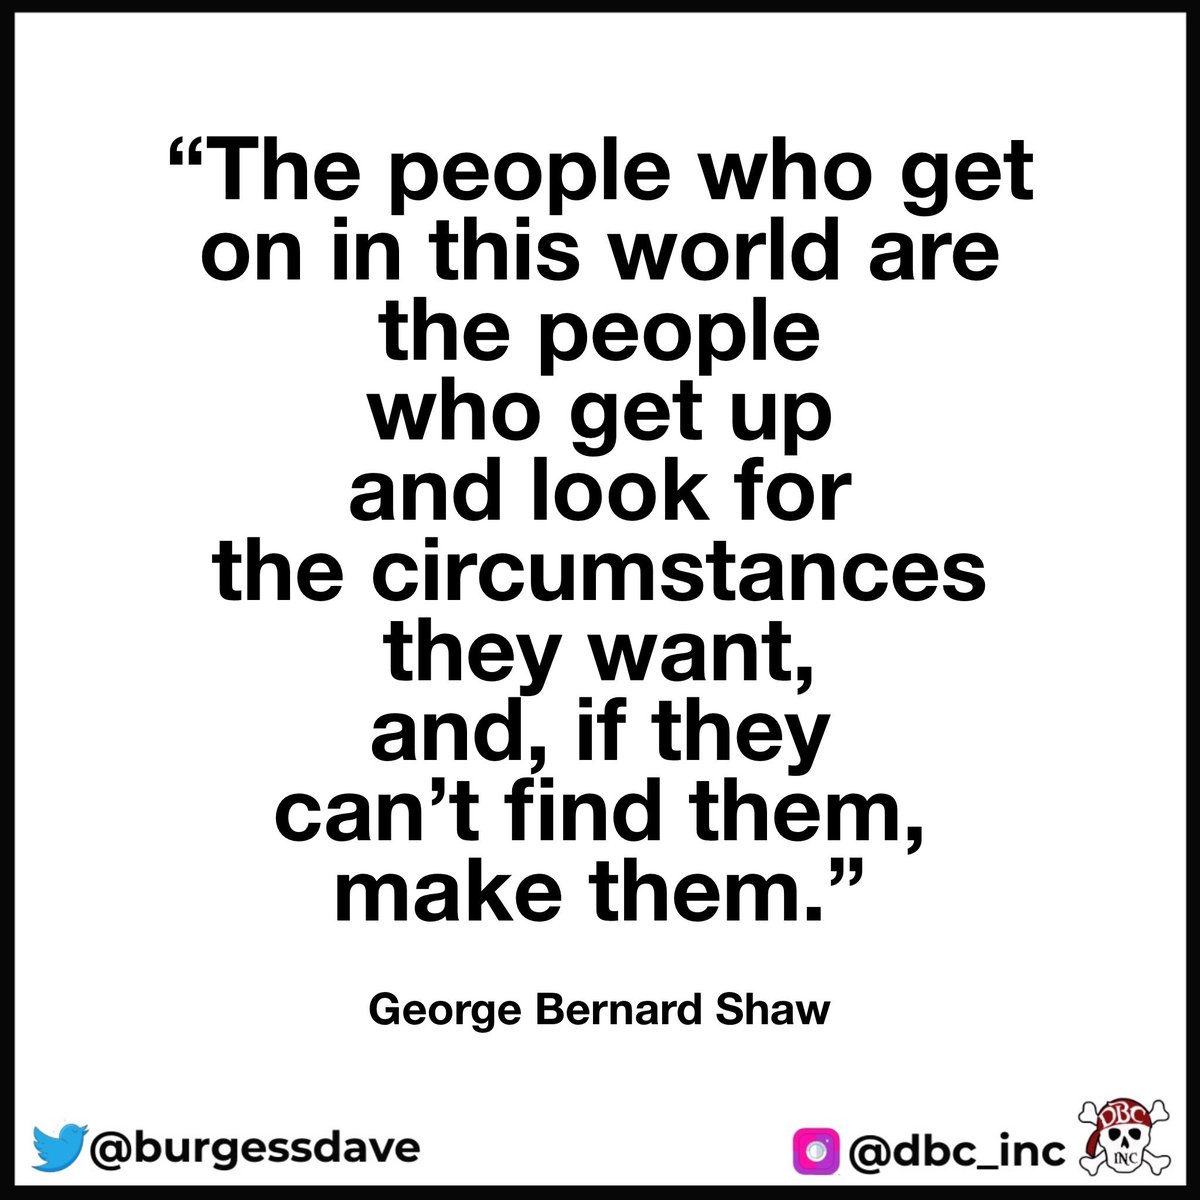 “The people who get on in this world are the people who get up and look for the circumstances they want, and, if they can’t find them, make them.” - George Bernard Shaw 
#success #Successsecrets #tlap